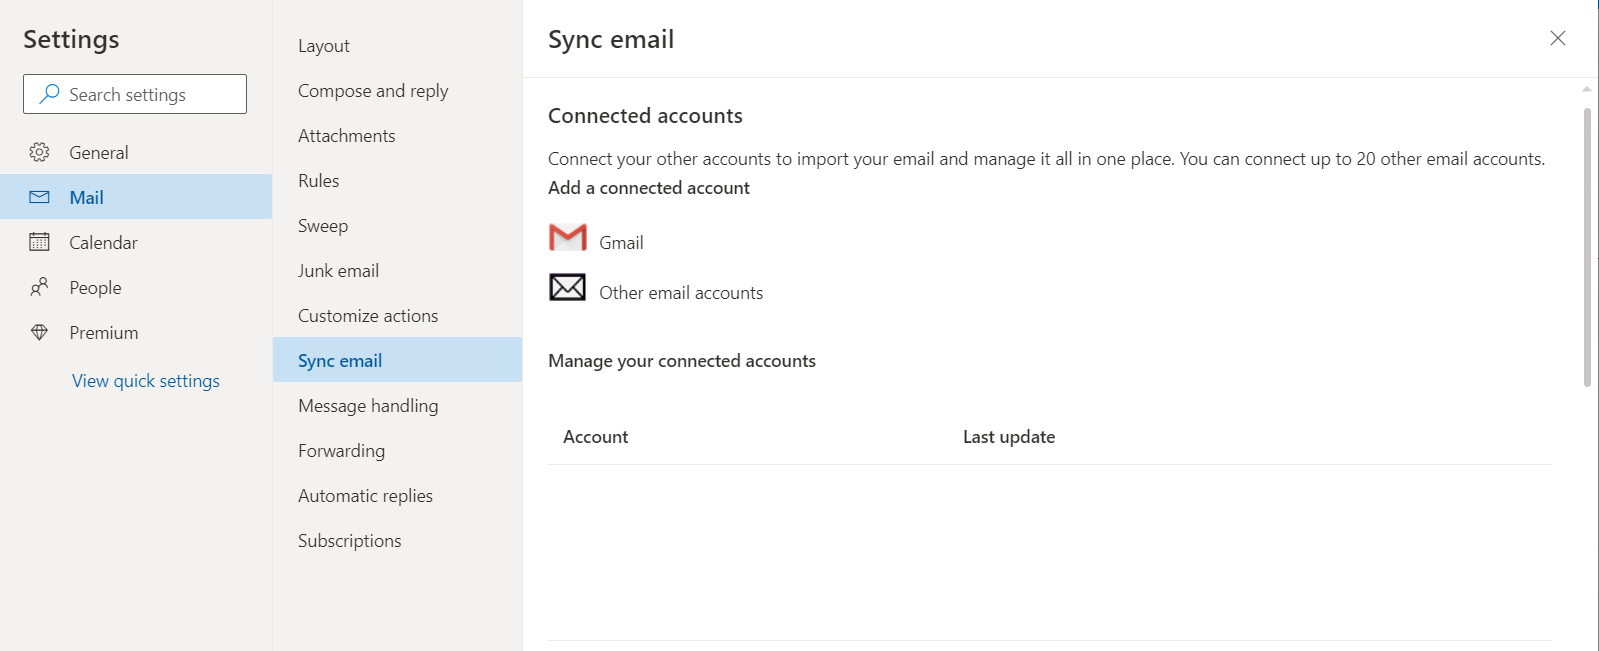 can i have two email accounts in outlook